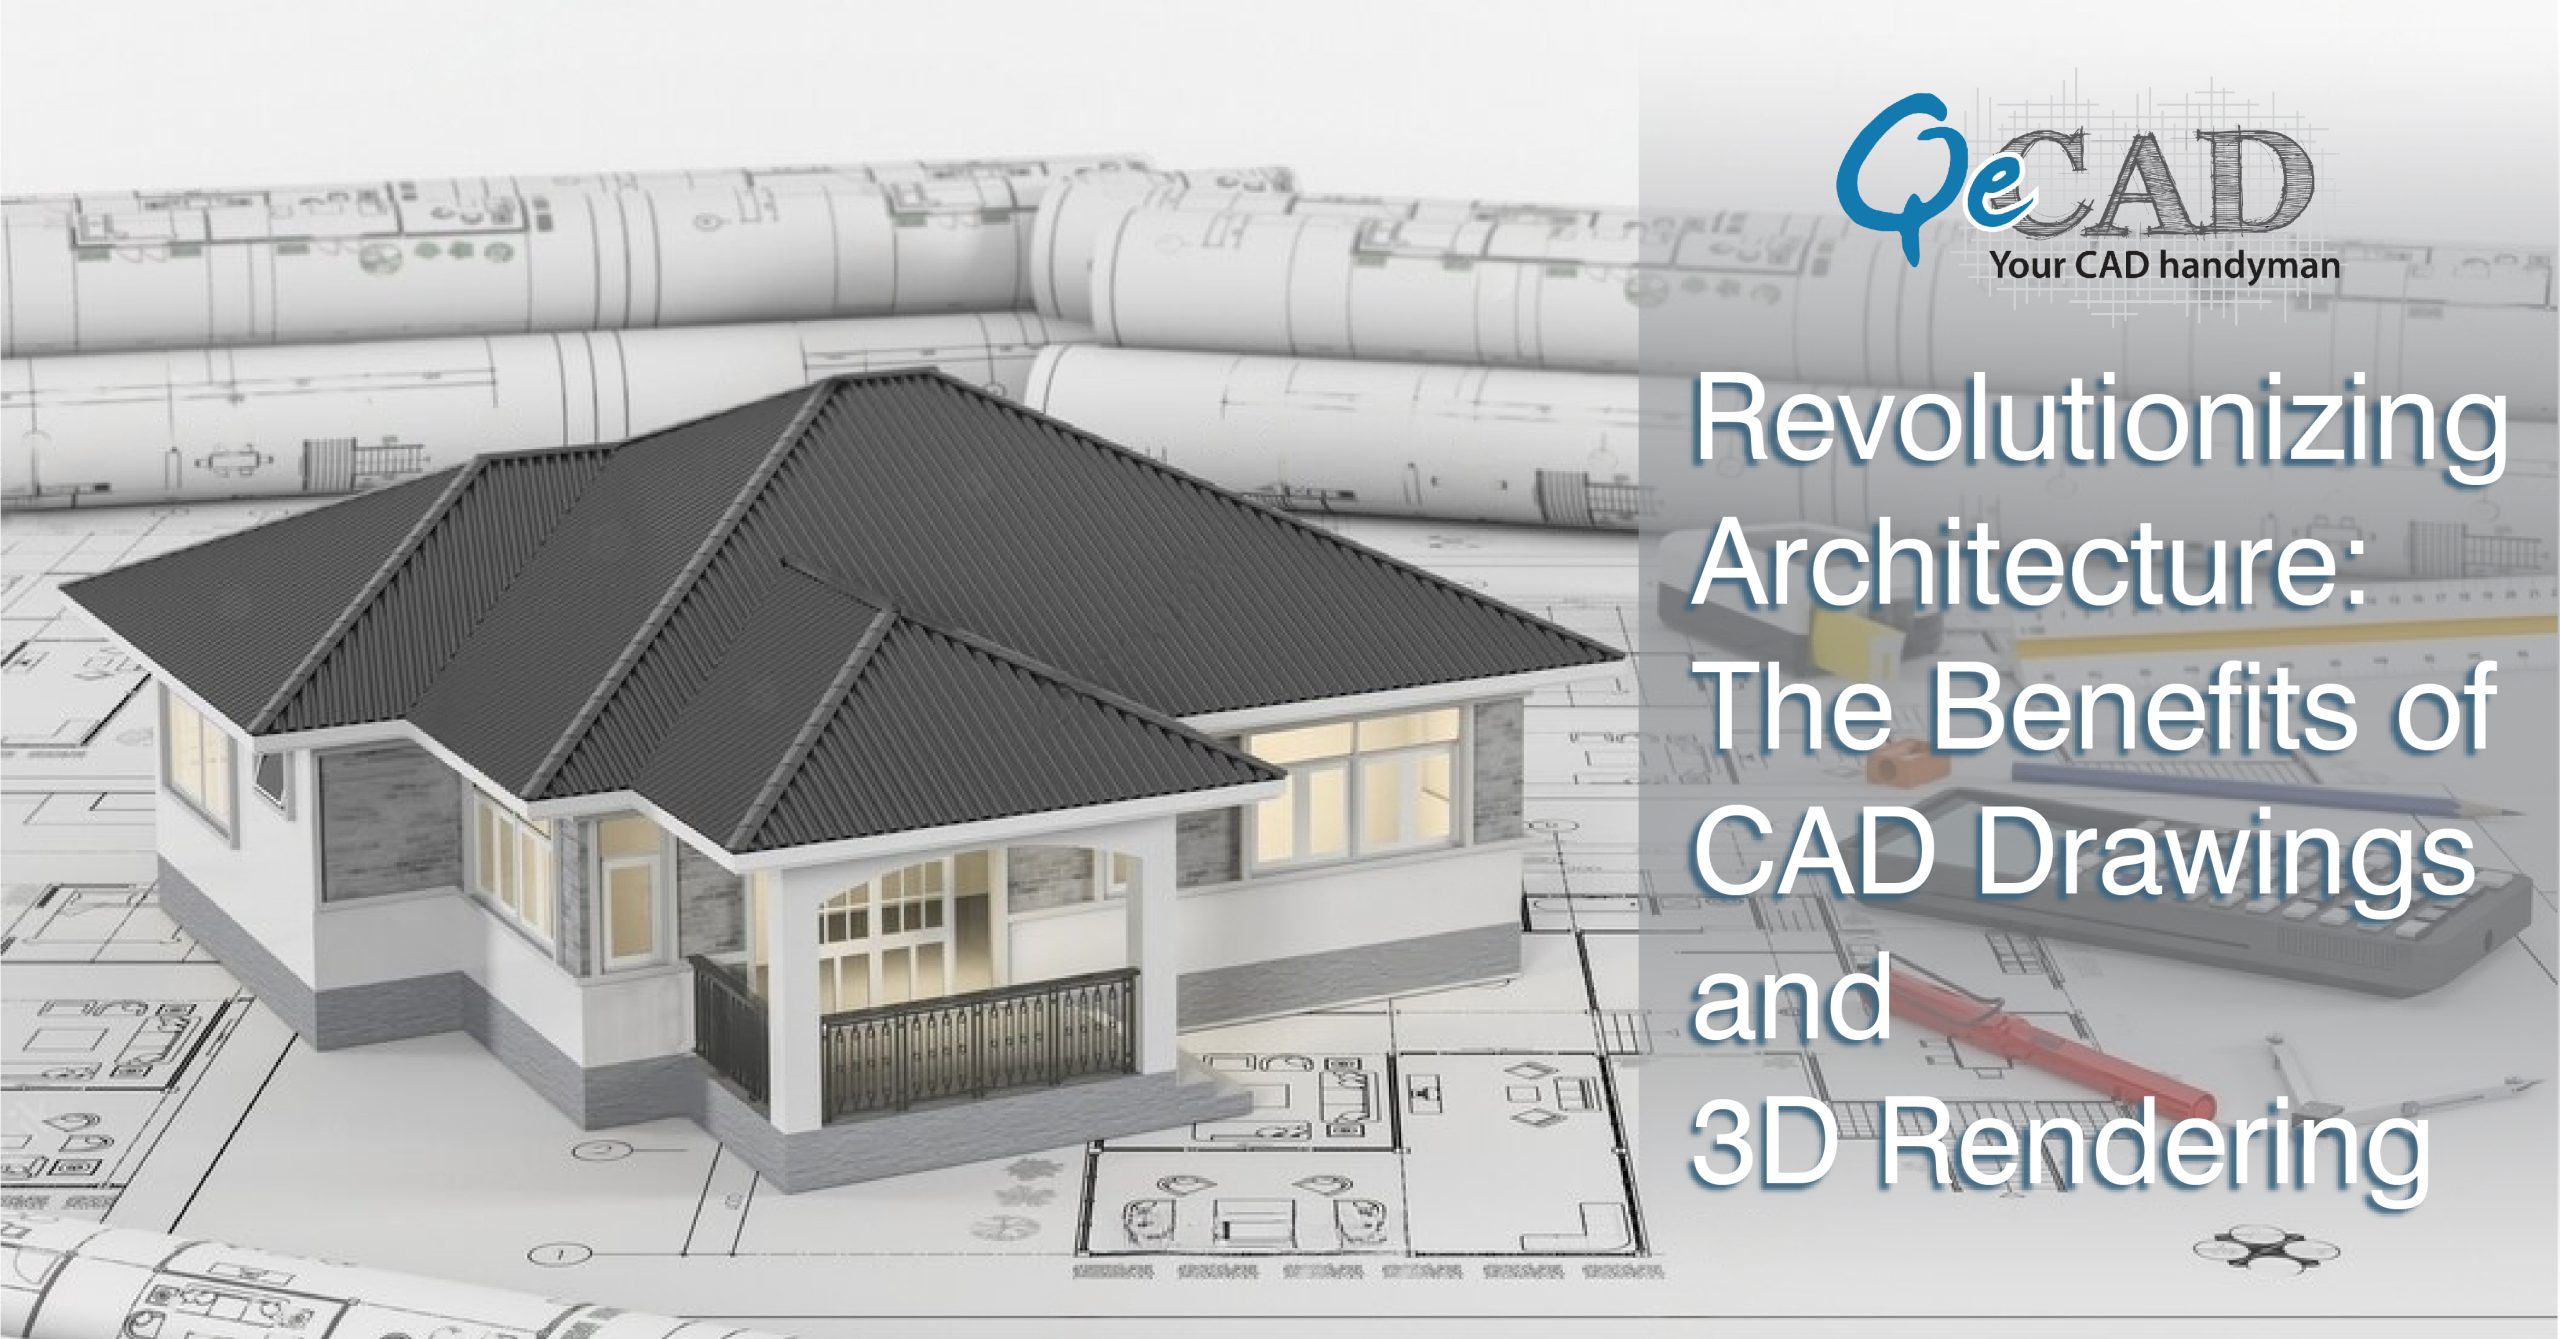 The Benefits of CAD Drawings and 3D Rendering Services